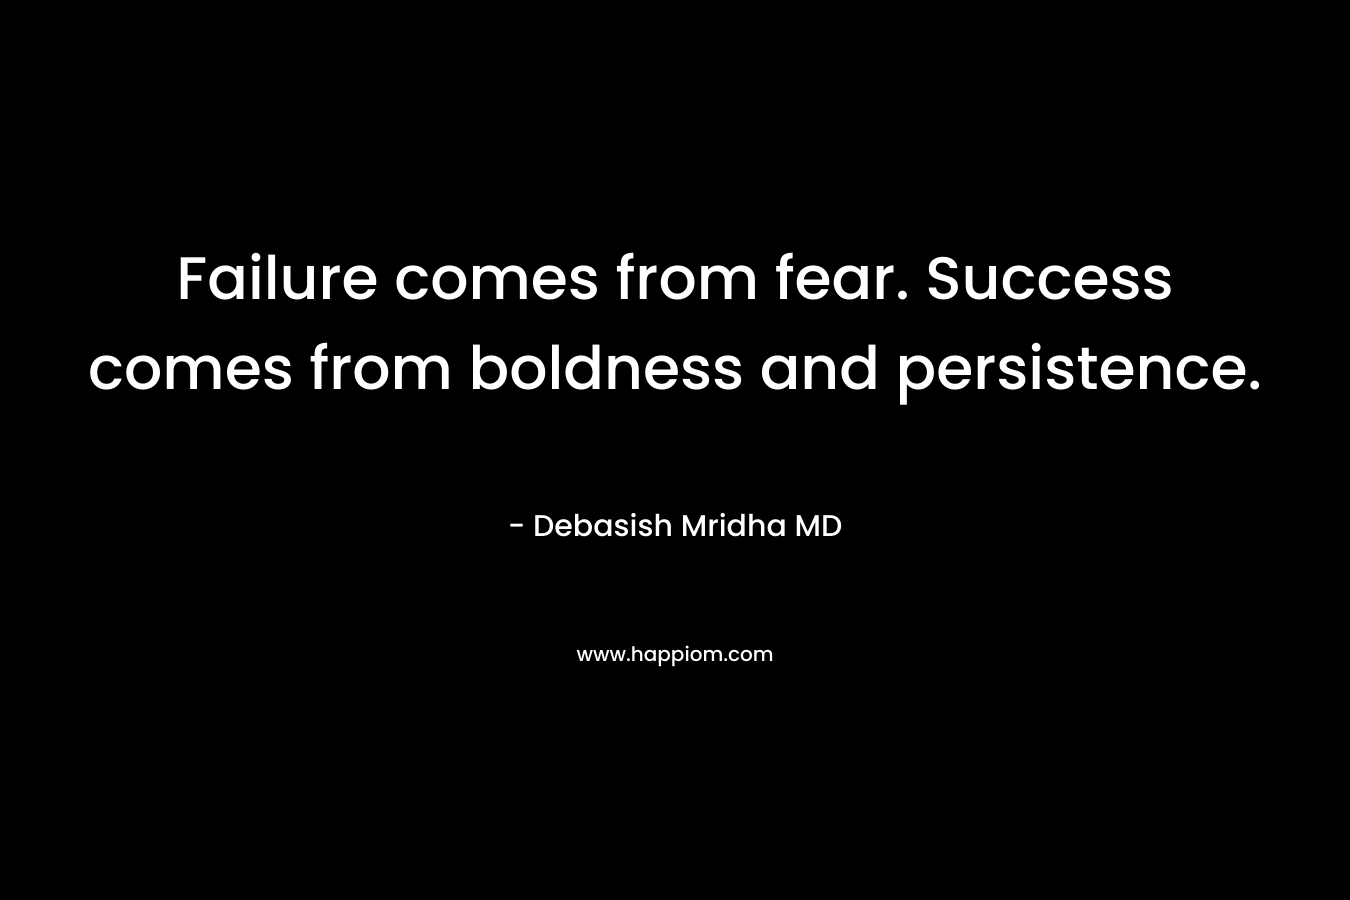 Failure comes from fear. Success comes from boldness and persistence.